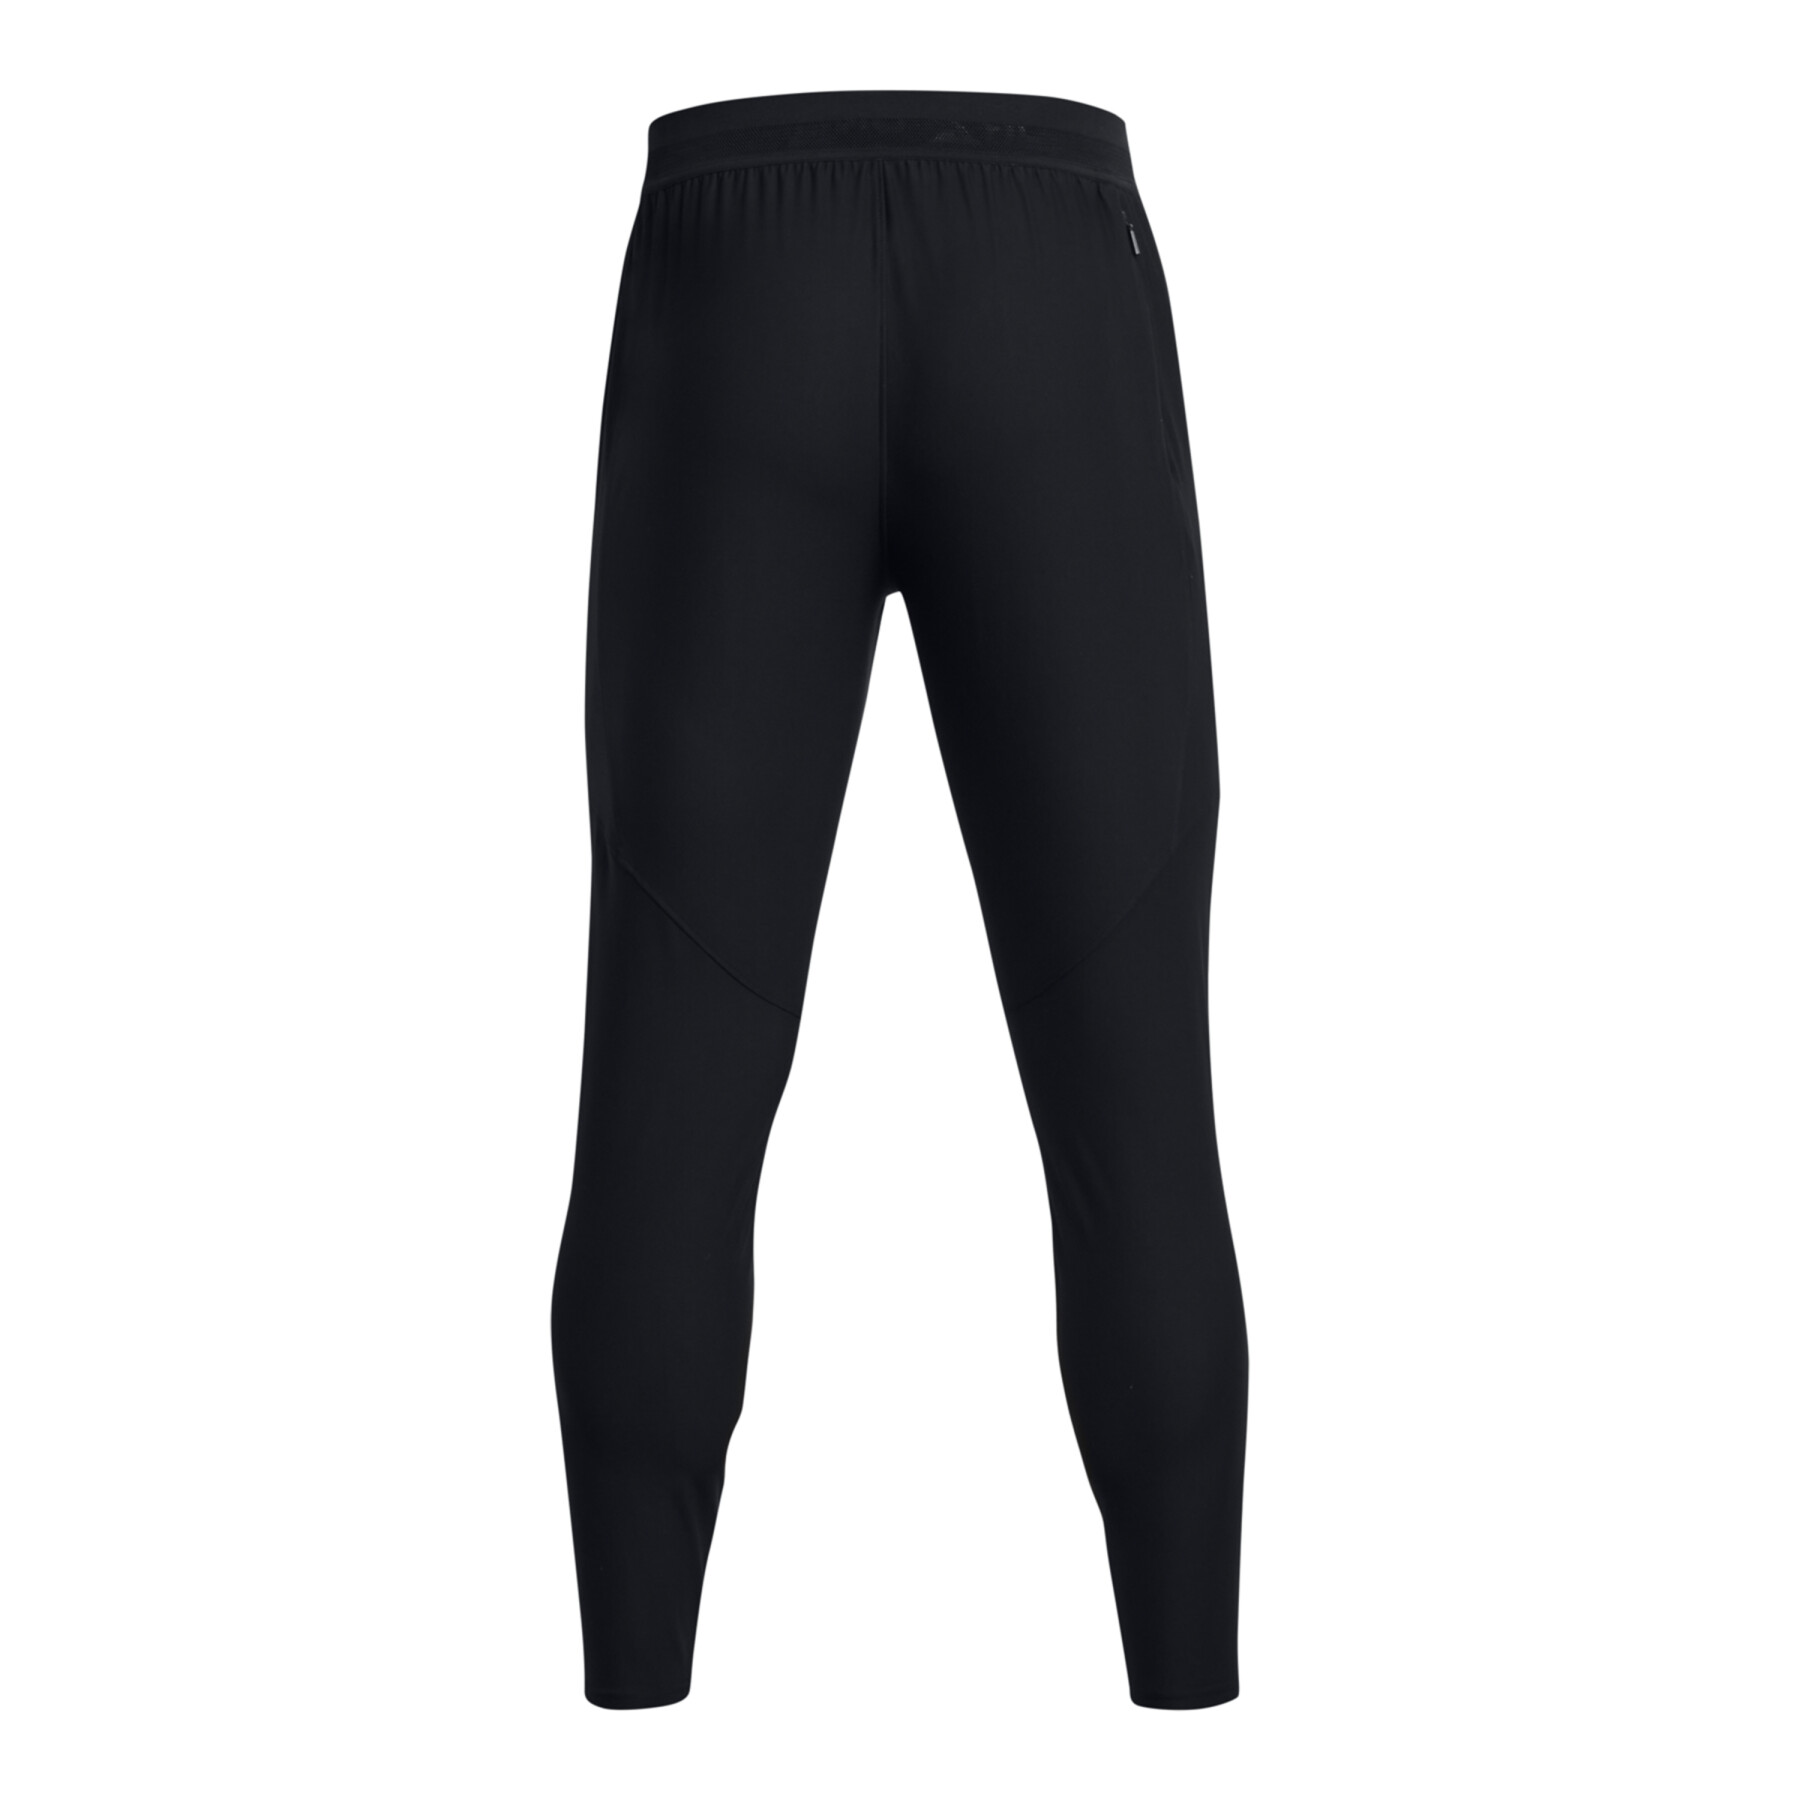 Training pants Under Armour Challenger Pro